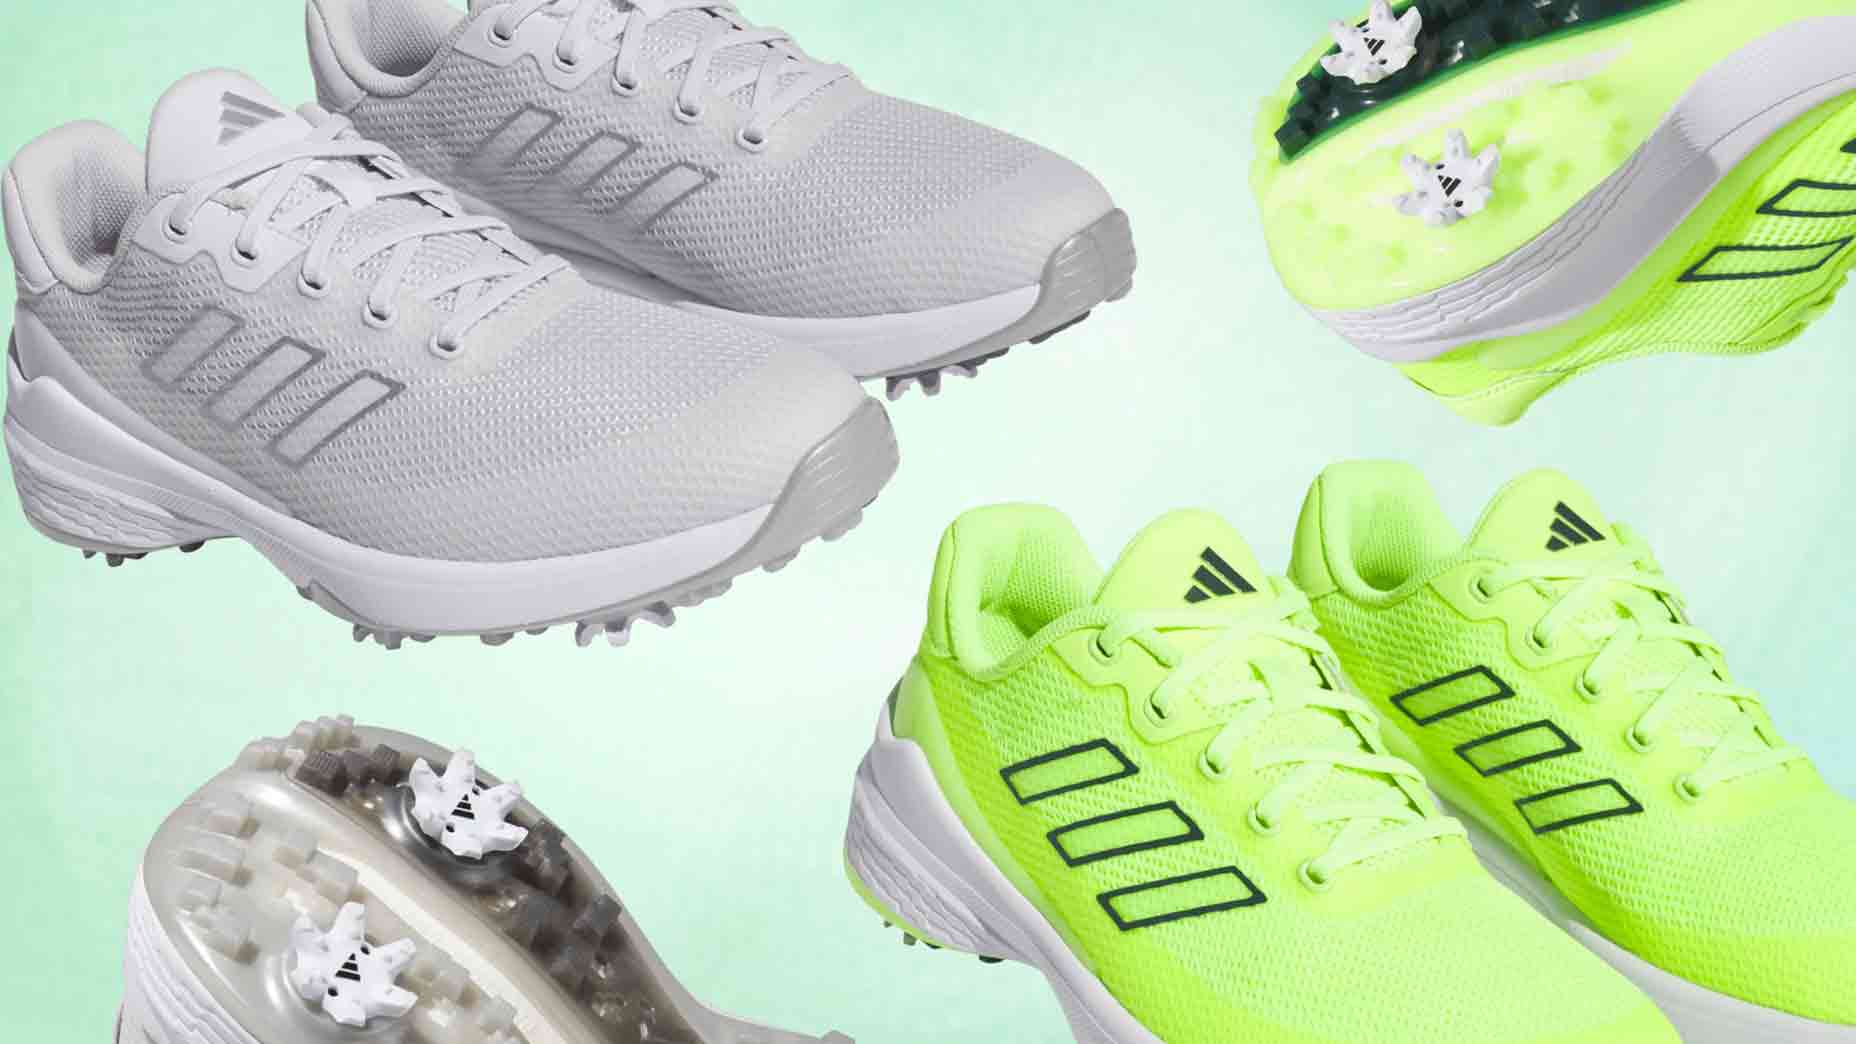 These new Adidas golf shoes are engineered to defeat the heat - BVM Sports